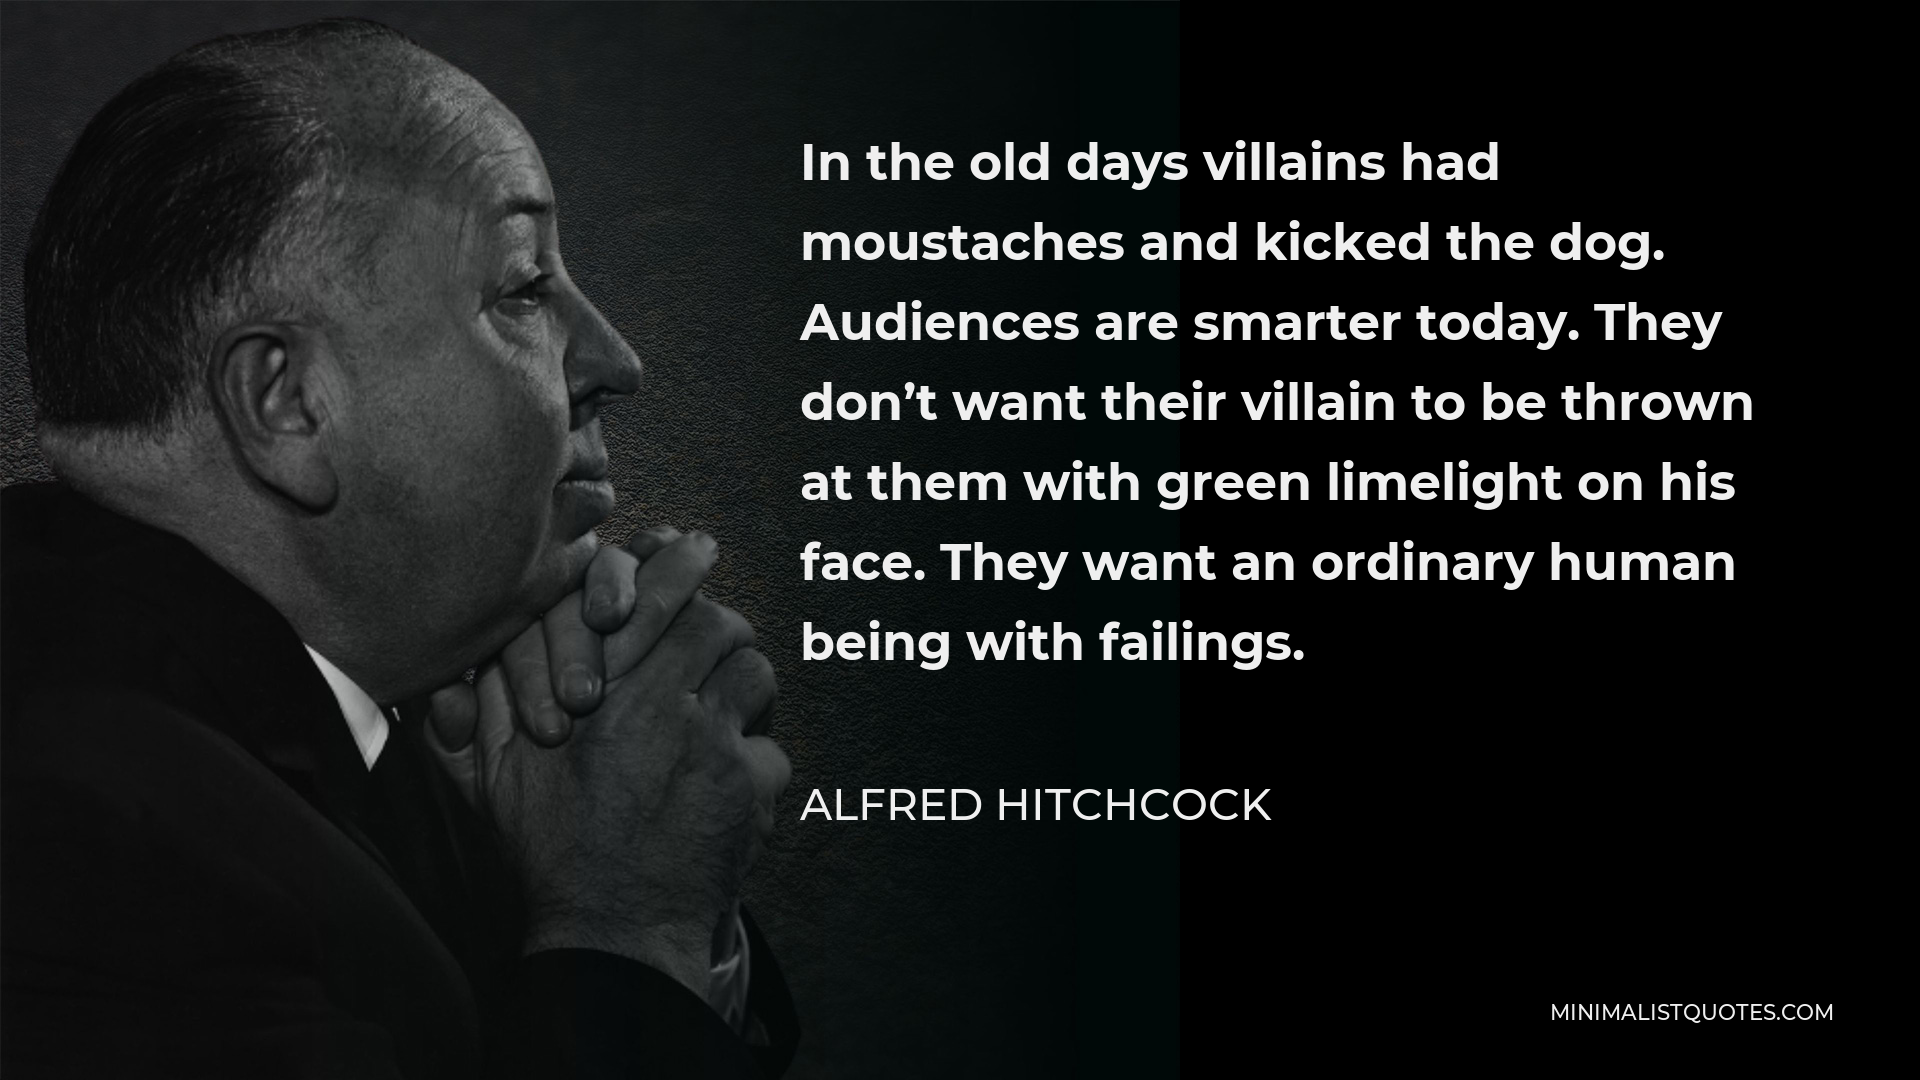 Alfred Hitchcock Quote - In the old days villains had moustaches and kicked the dog. Audiences are smarter today. They don’t want their villain to be thrown at them with green limelight on his face. They want an ordinary human being with failings.